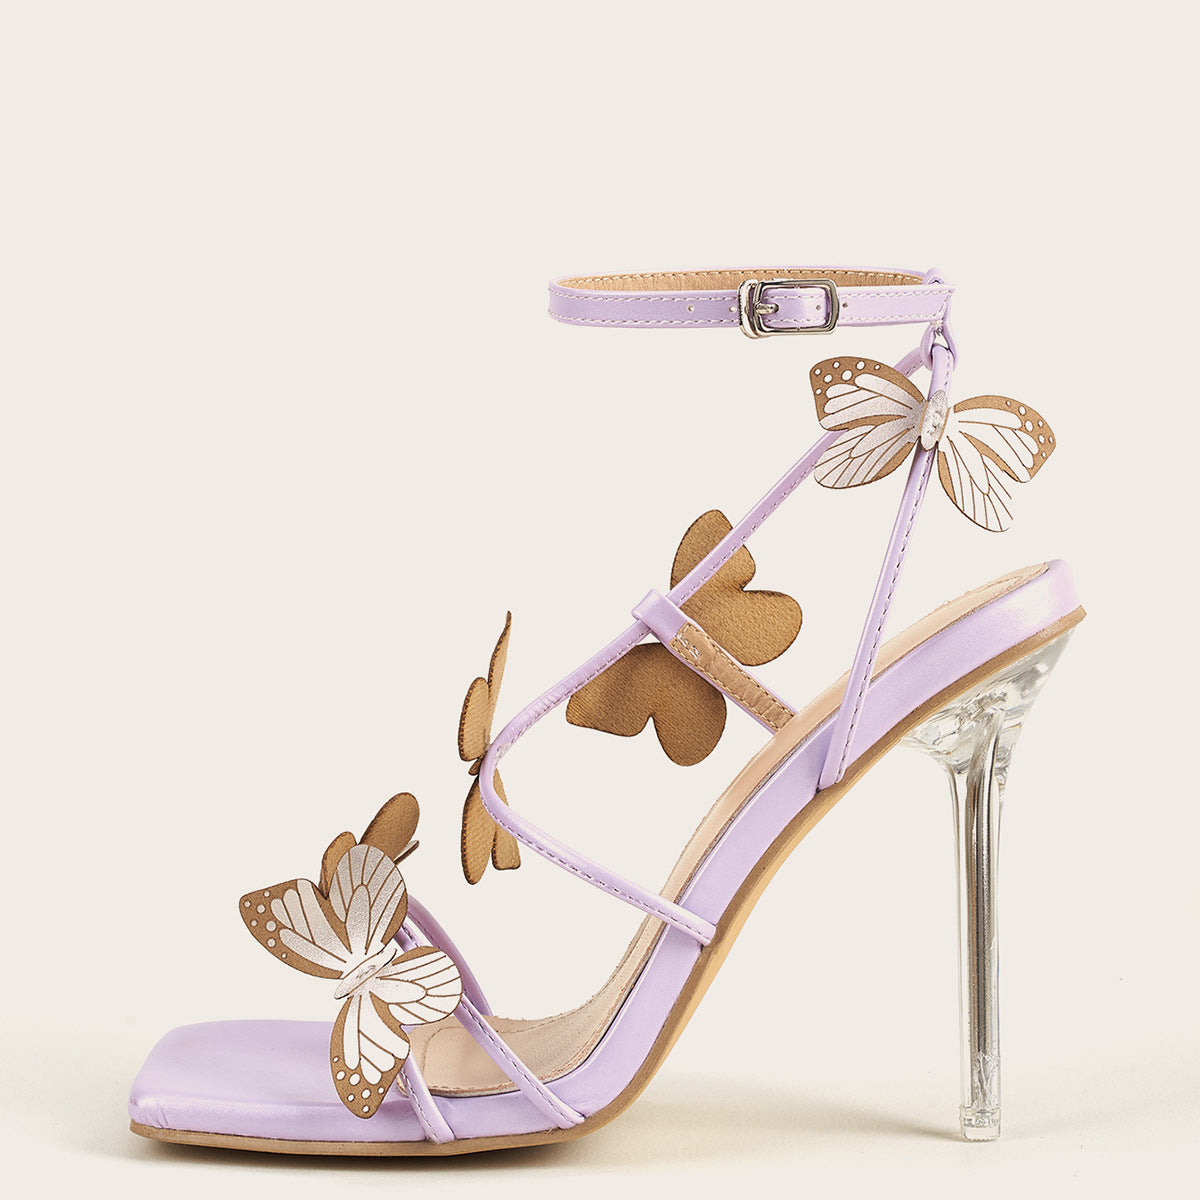 Crystal stiletto high heel sandals with bow